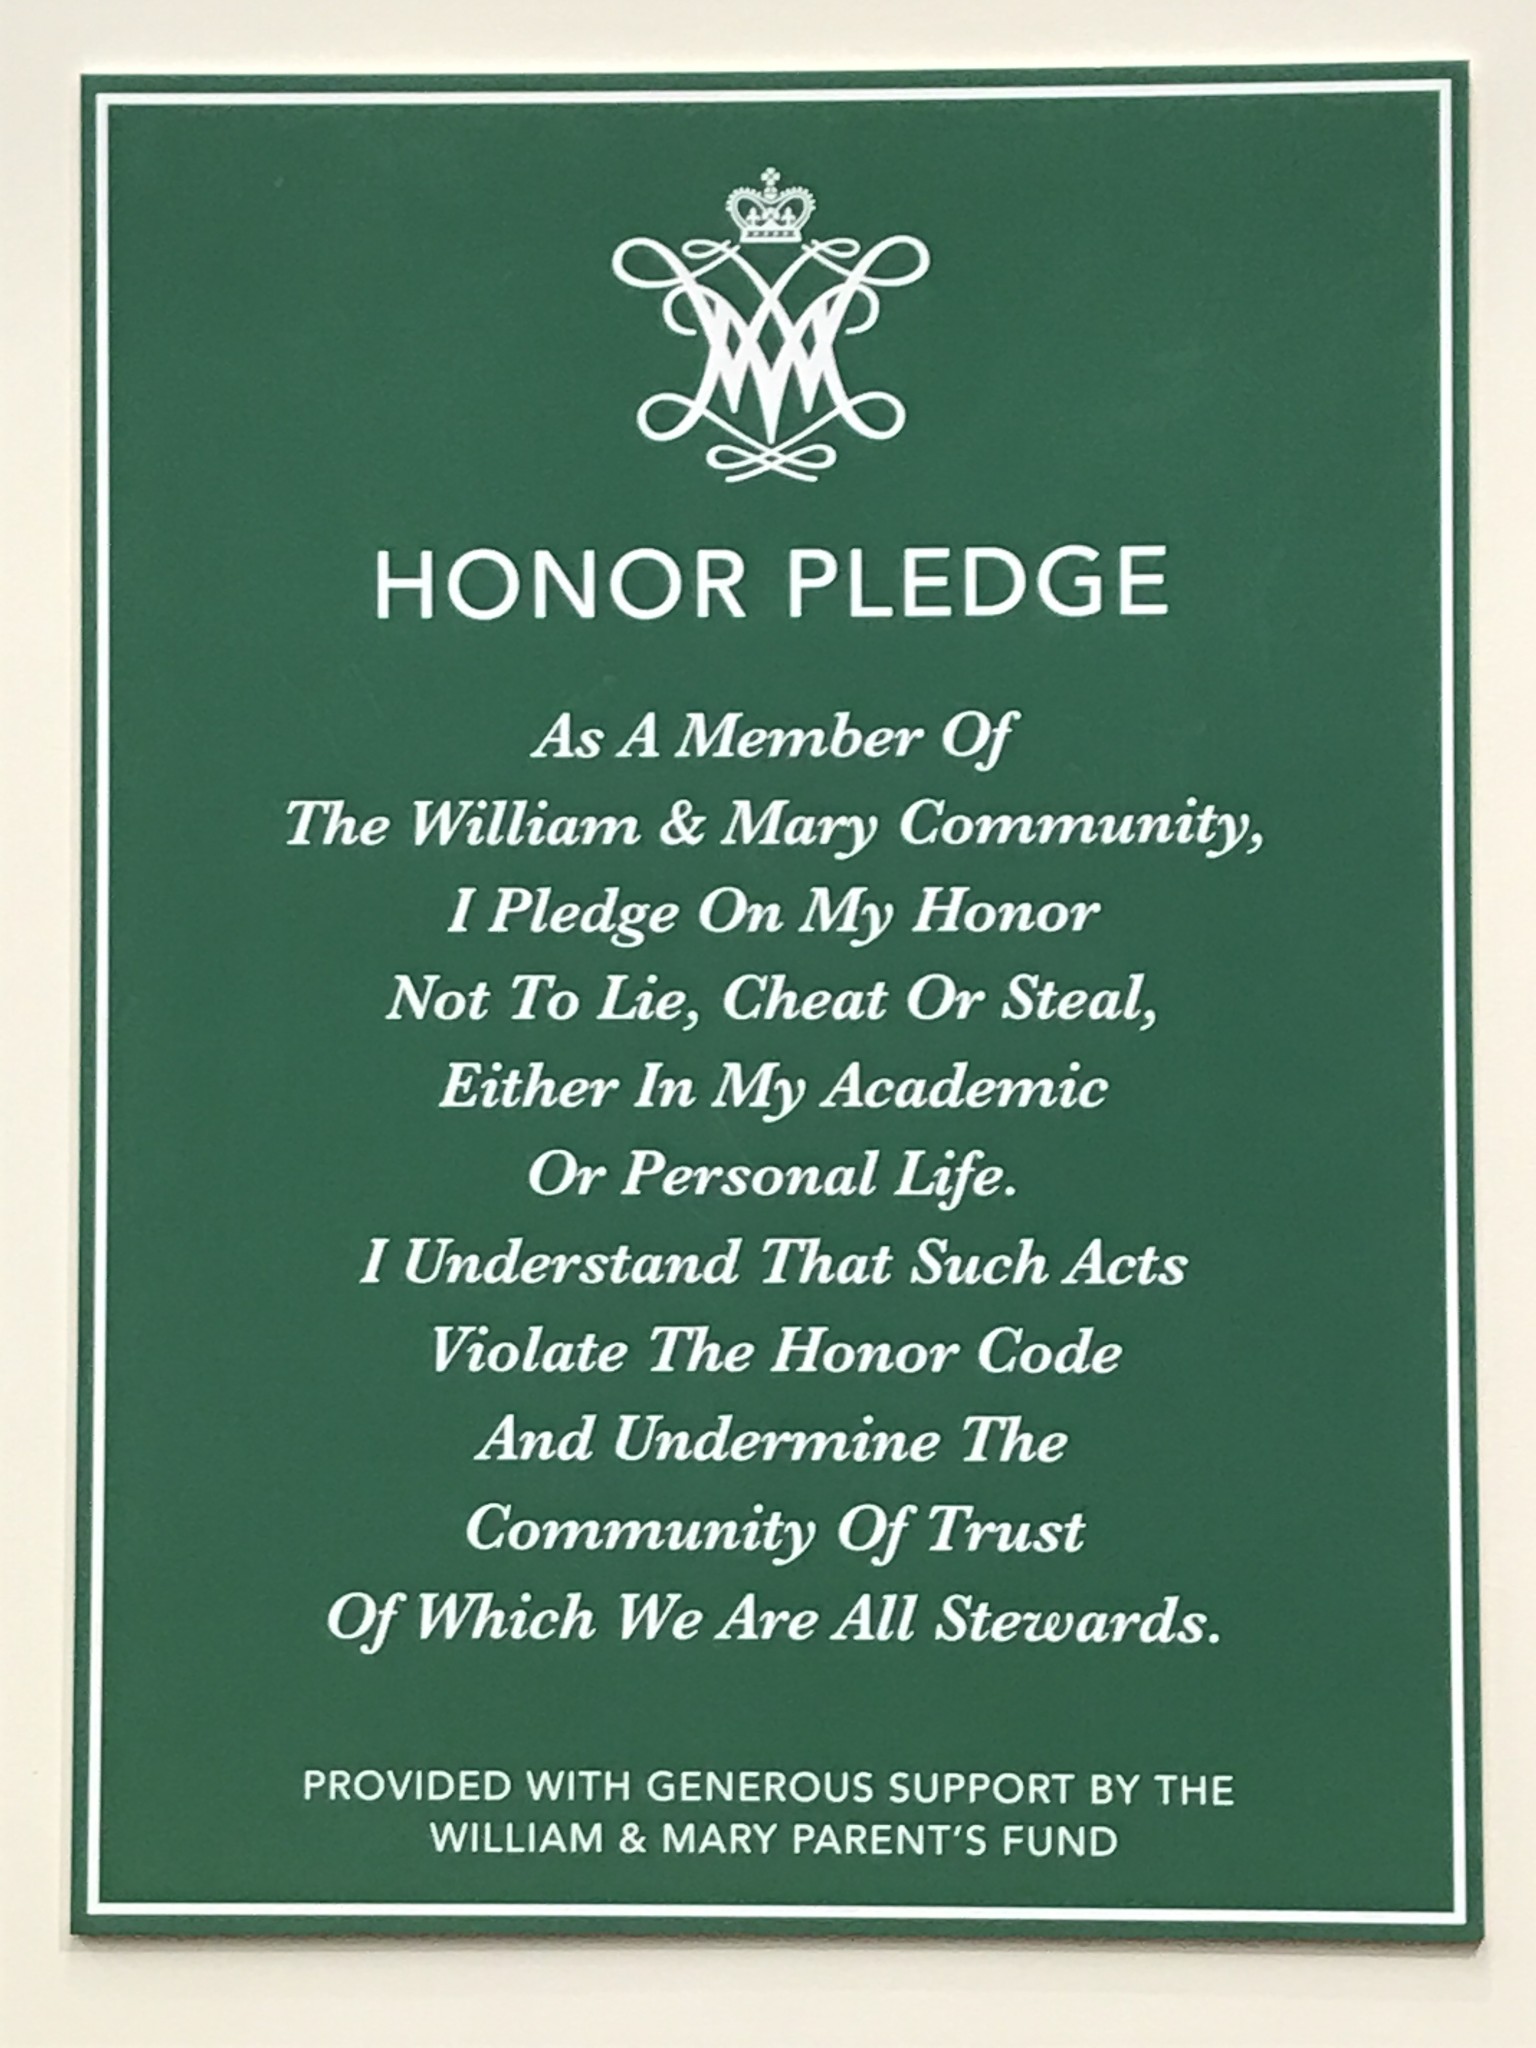 Honor Code Sign Design Questionable At Best Flat Hat News